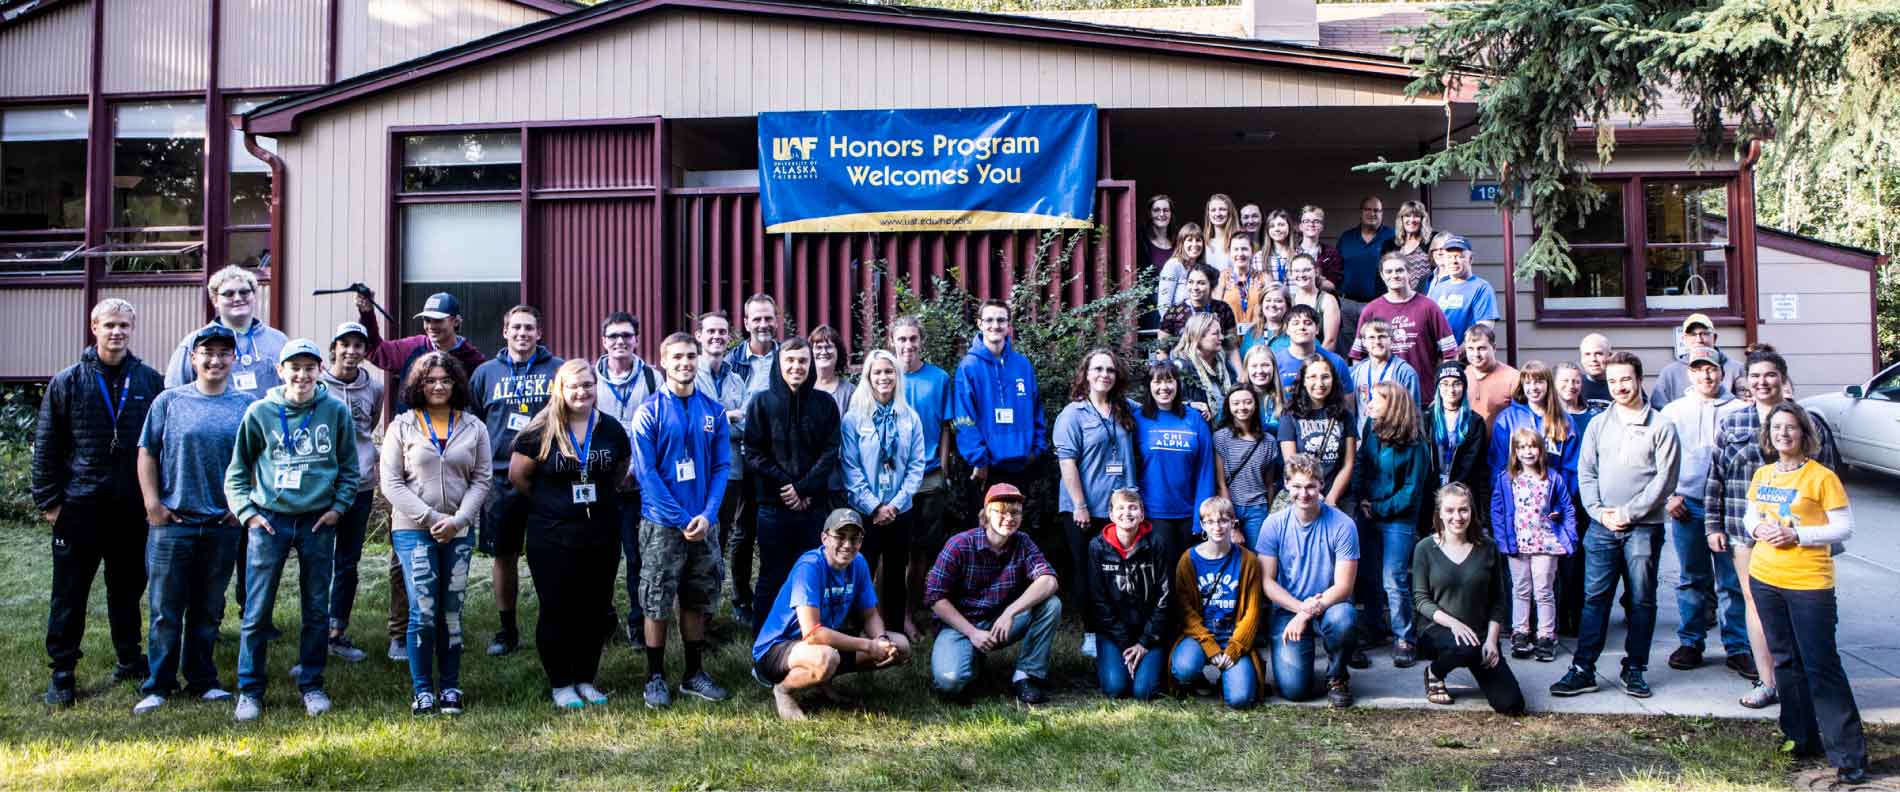 UAF Honors Students group photo in front of the Honors House